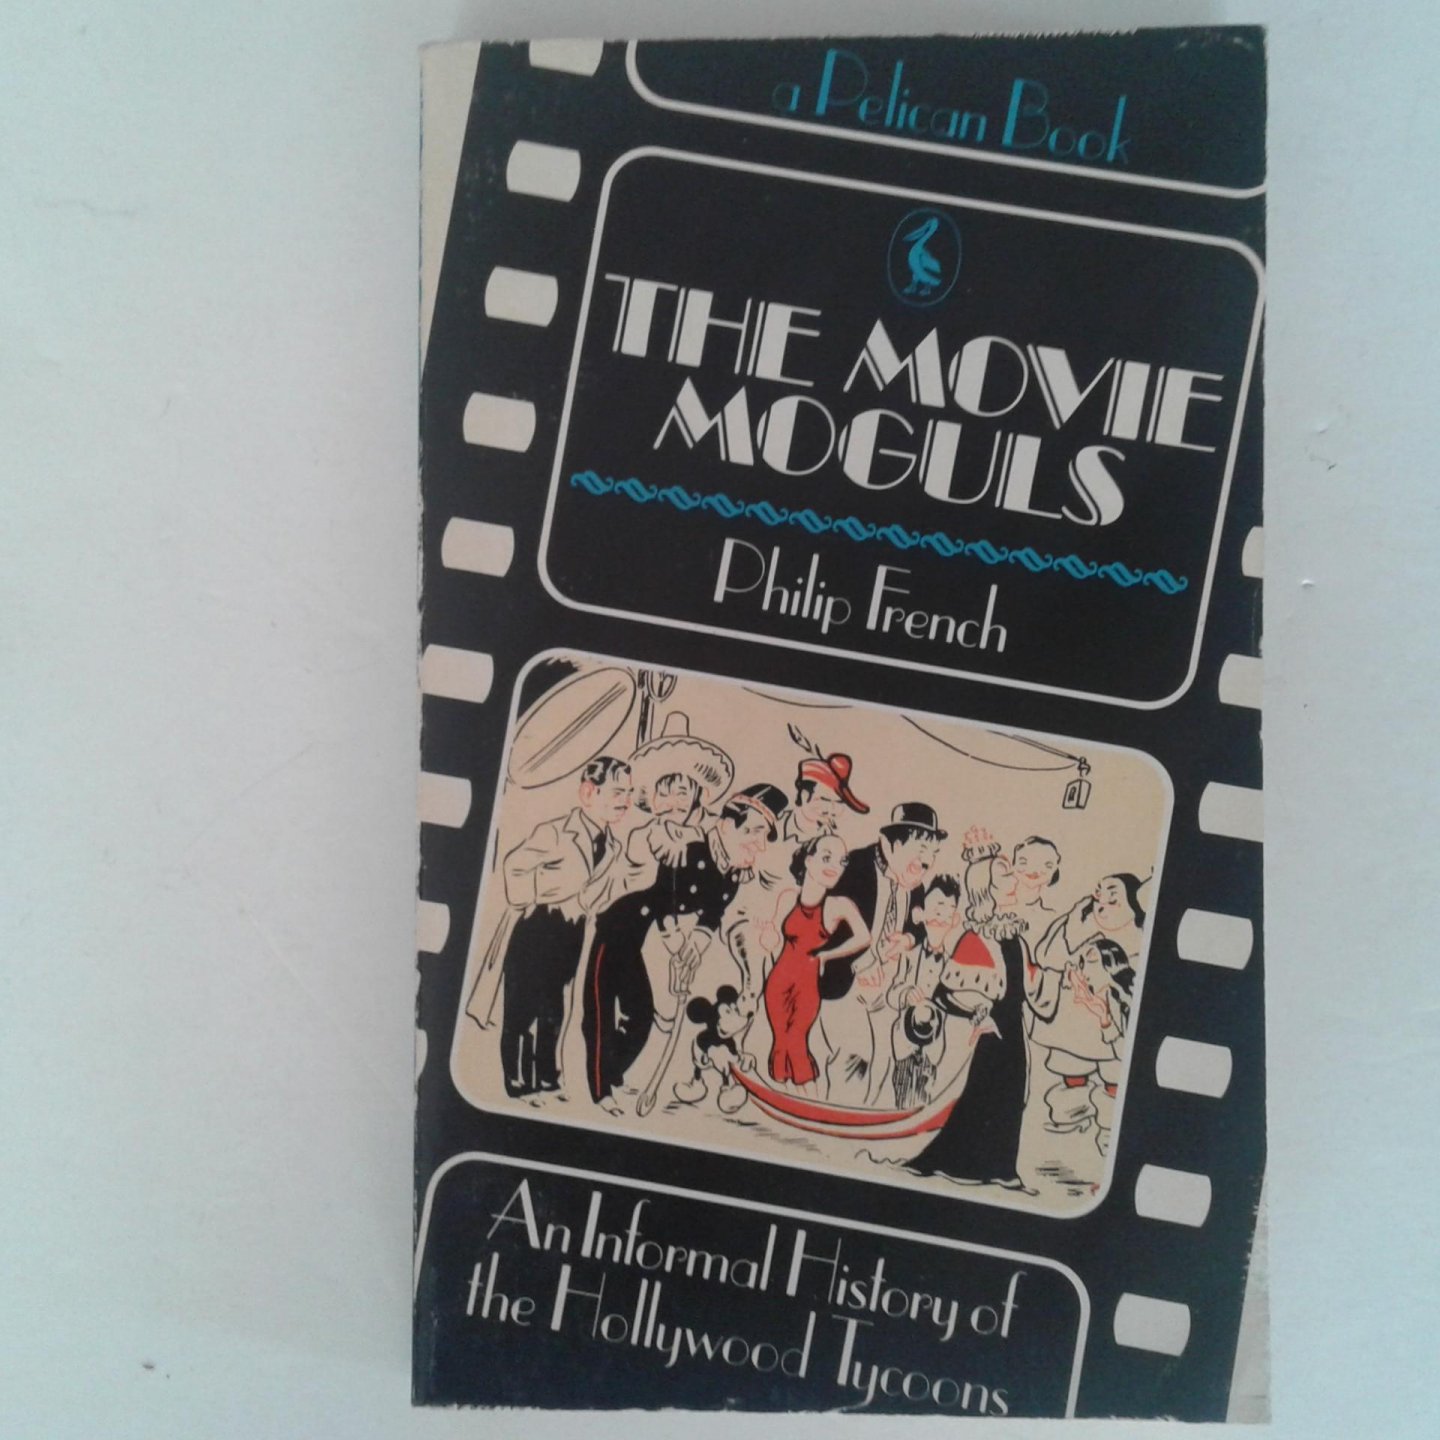 French, Philip - The Movie Moguls ; An informal history of Hollywood Tycoons